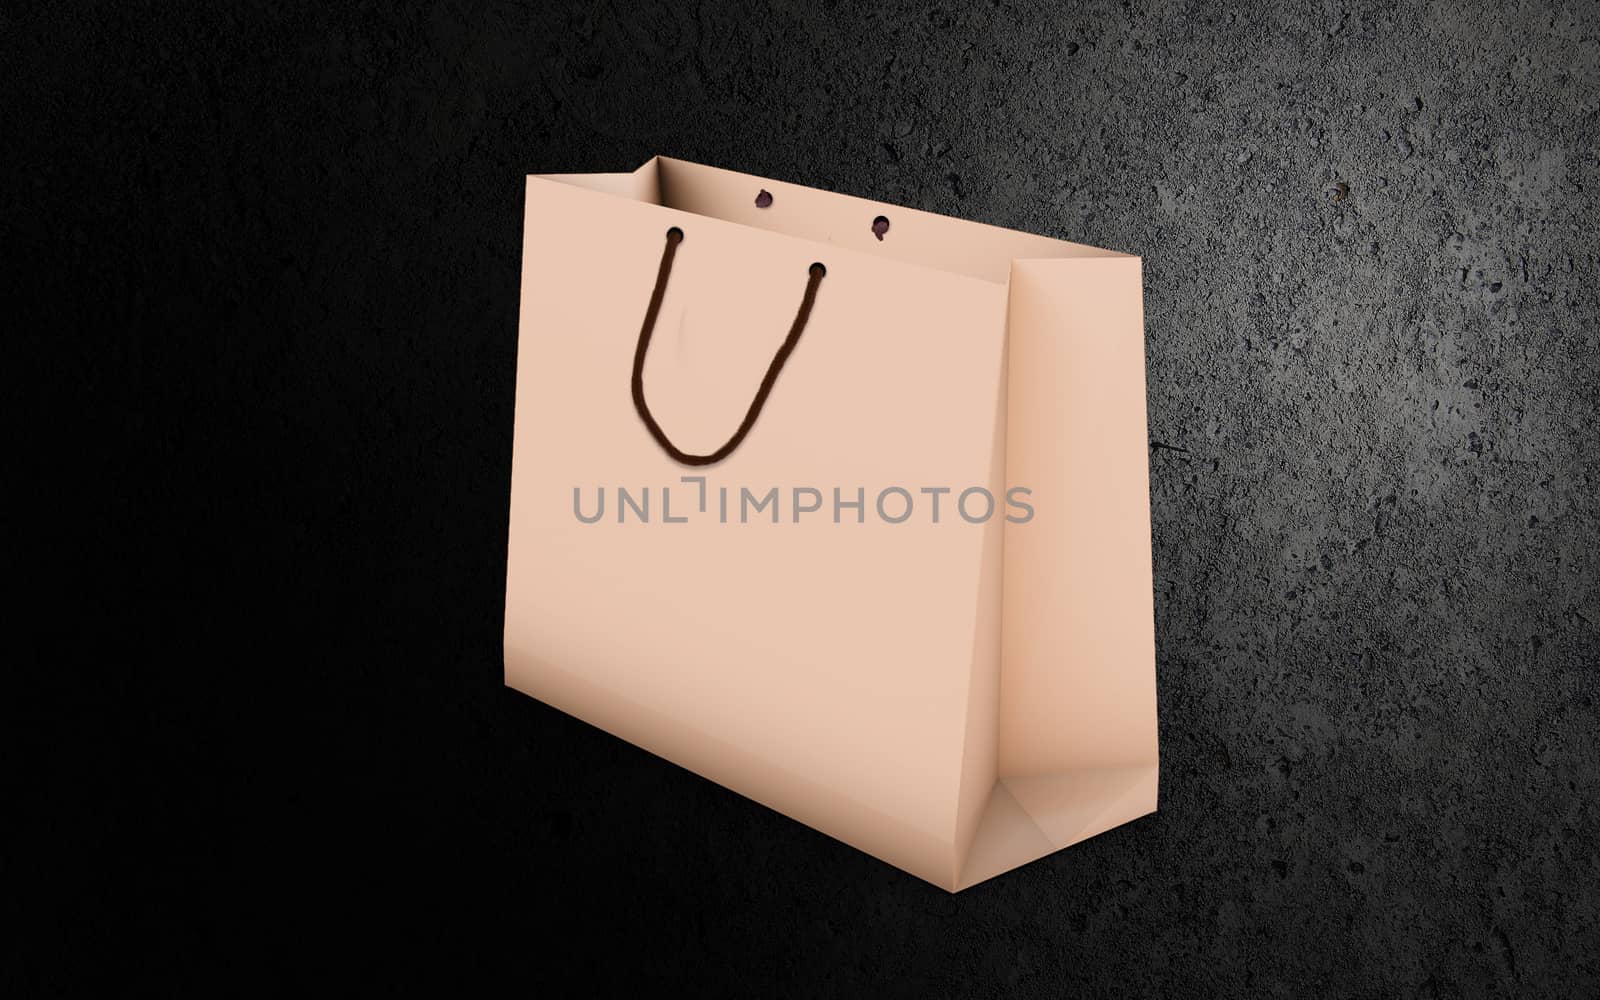 paper bag for shopping on a dark background